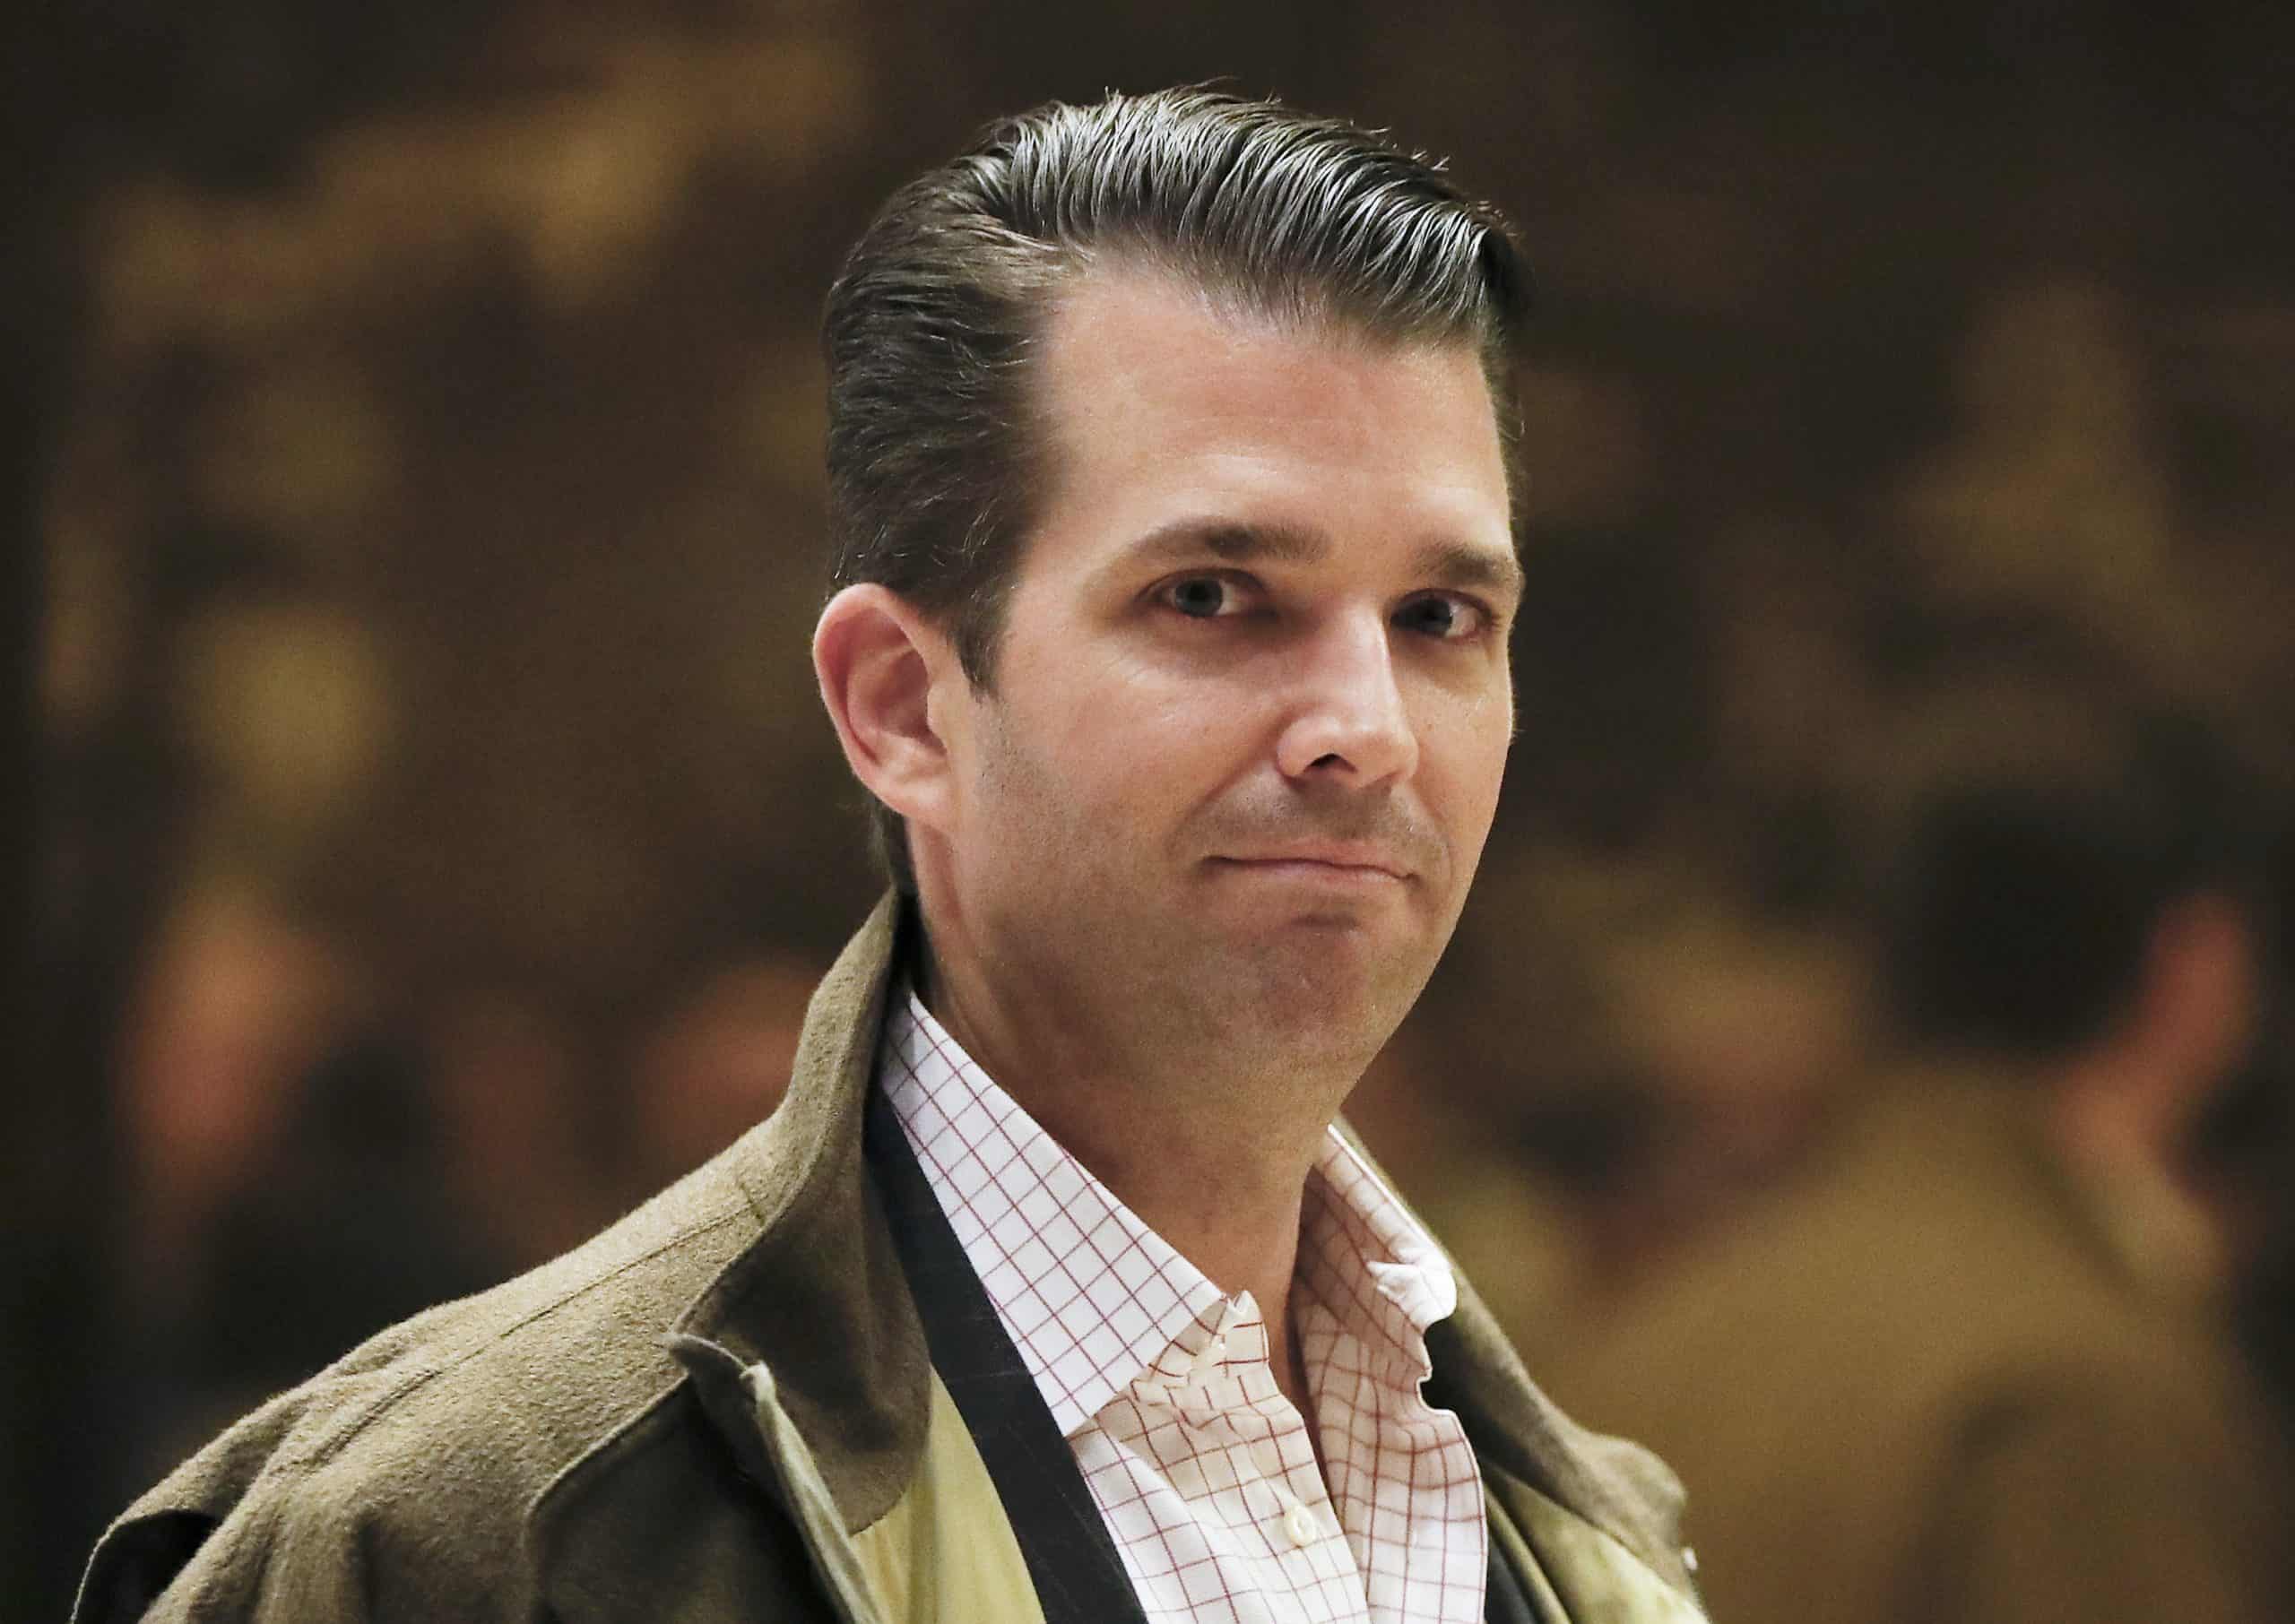 ‘Reckless’ Don Jr. urges Trump to ‘go to total war’ over election results